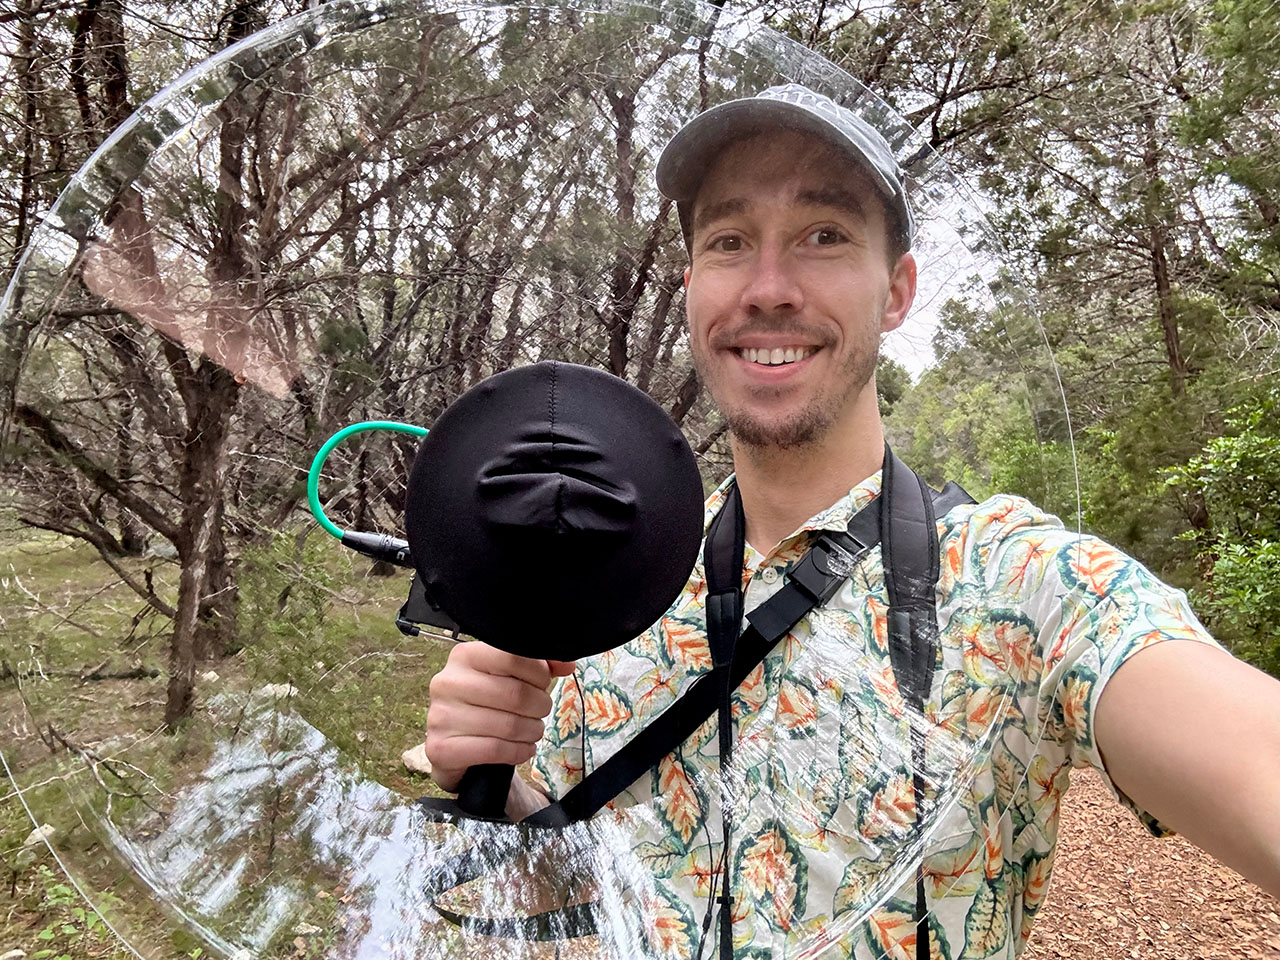 Louder, closer, clearer: Recordings birds with a parabolic microphone